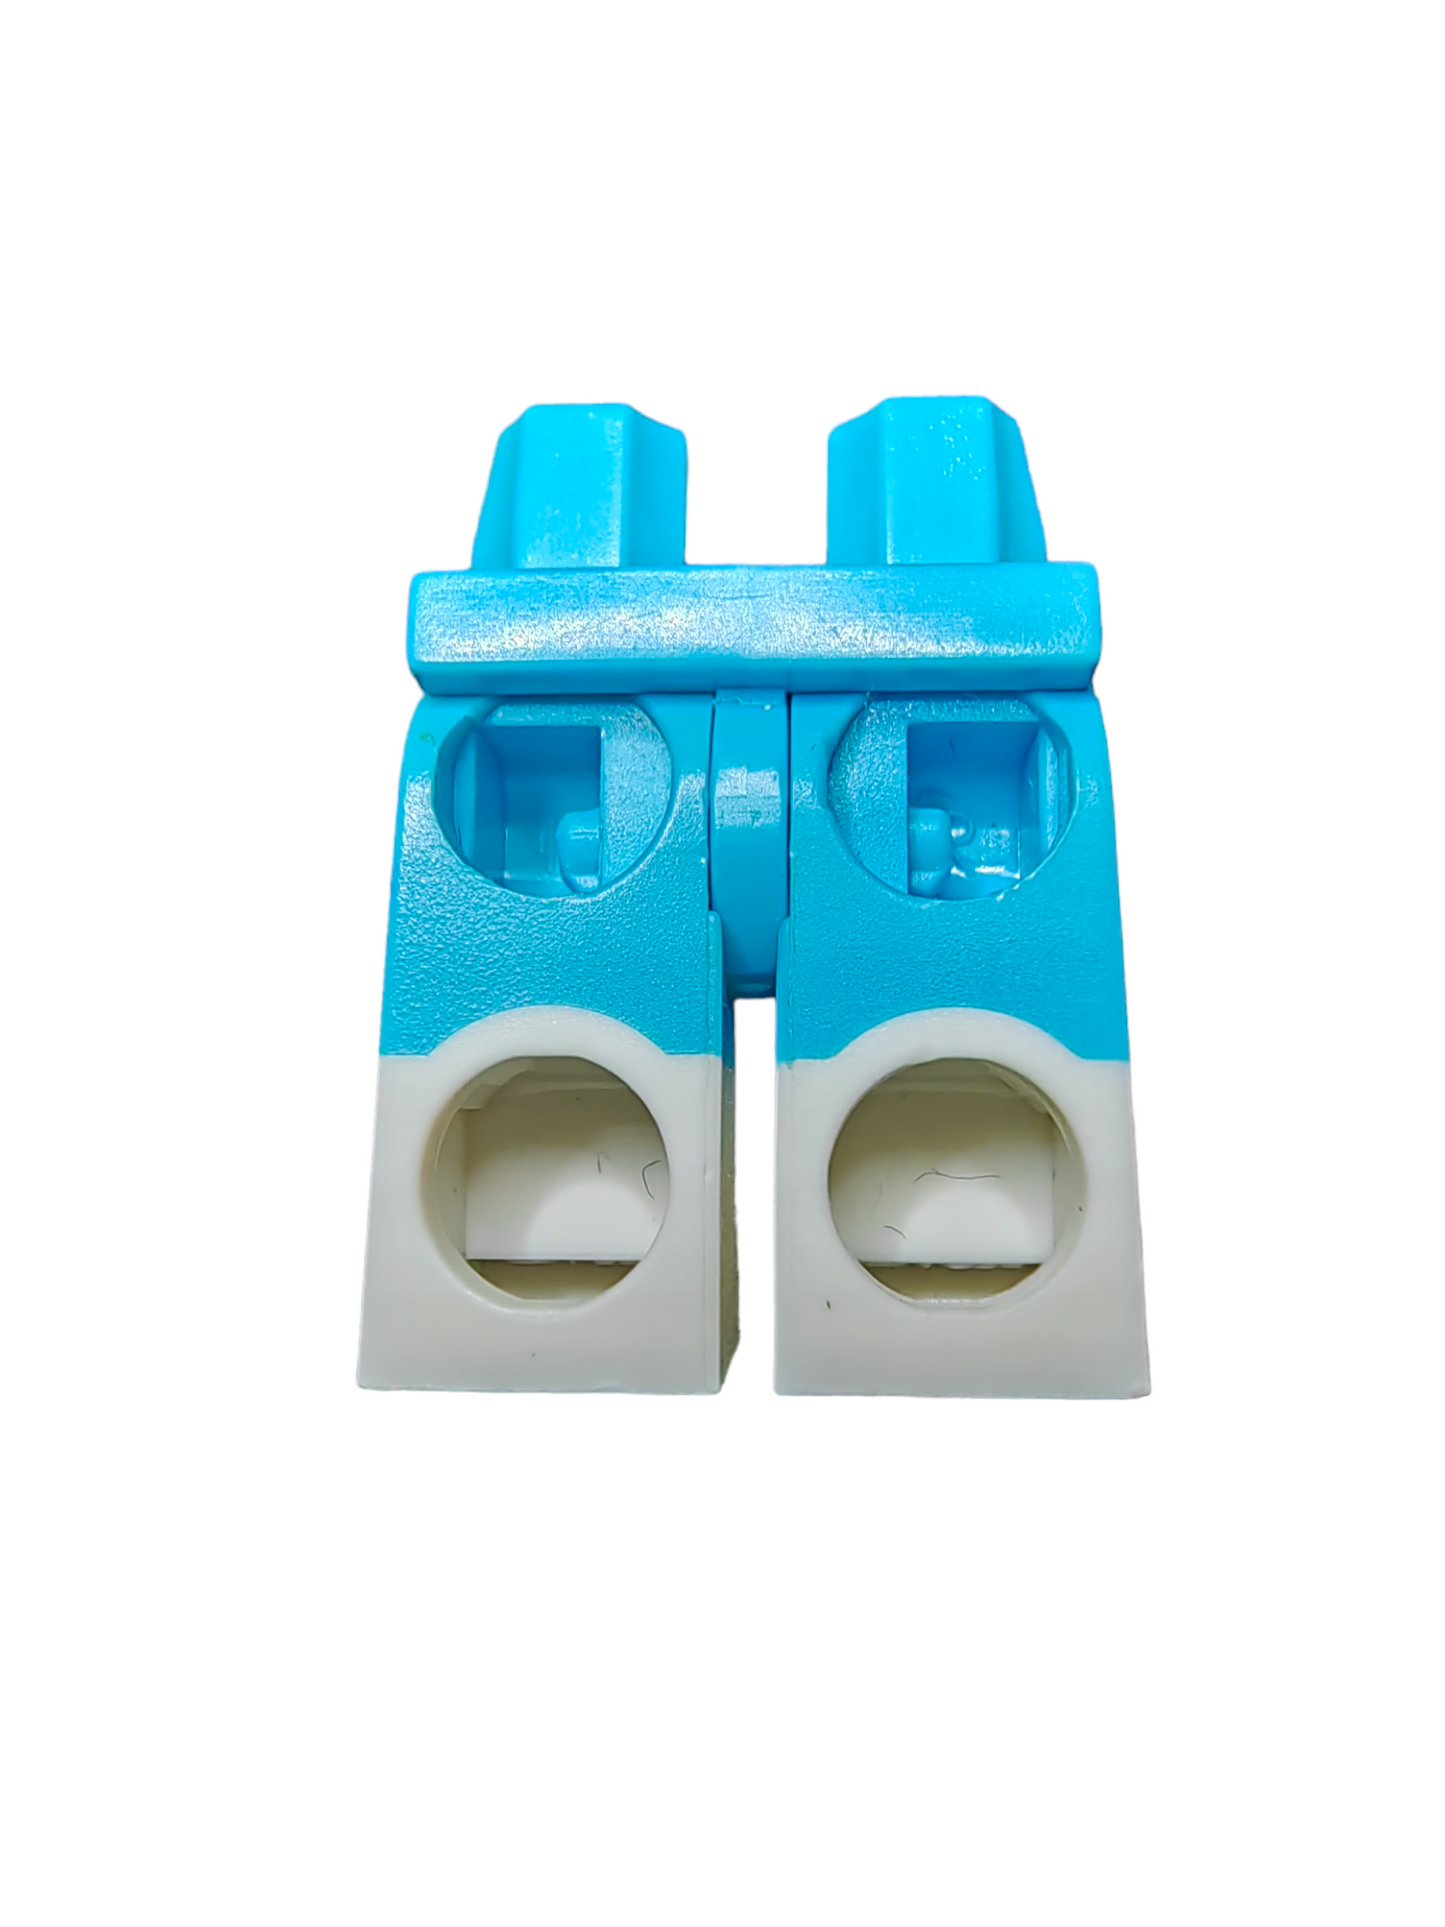 Minifigure Legs,  Blue and White Boots - UB1486